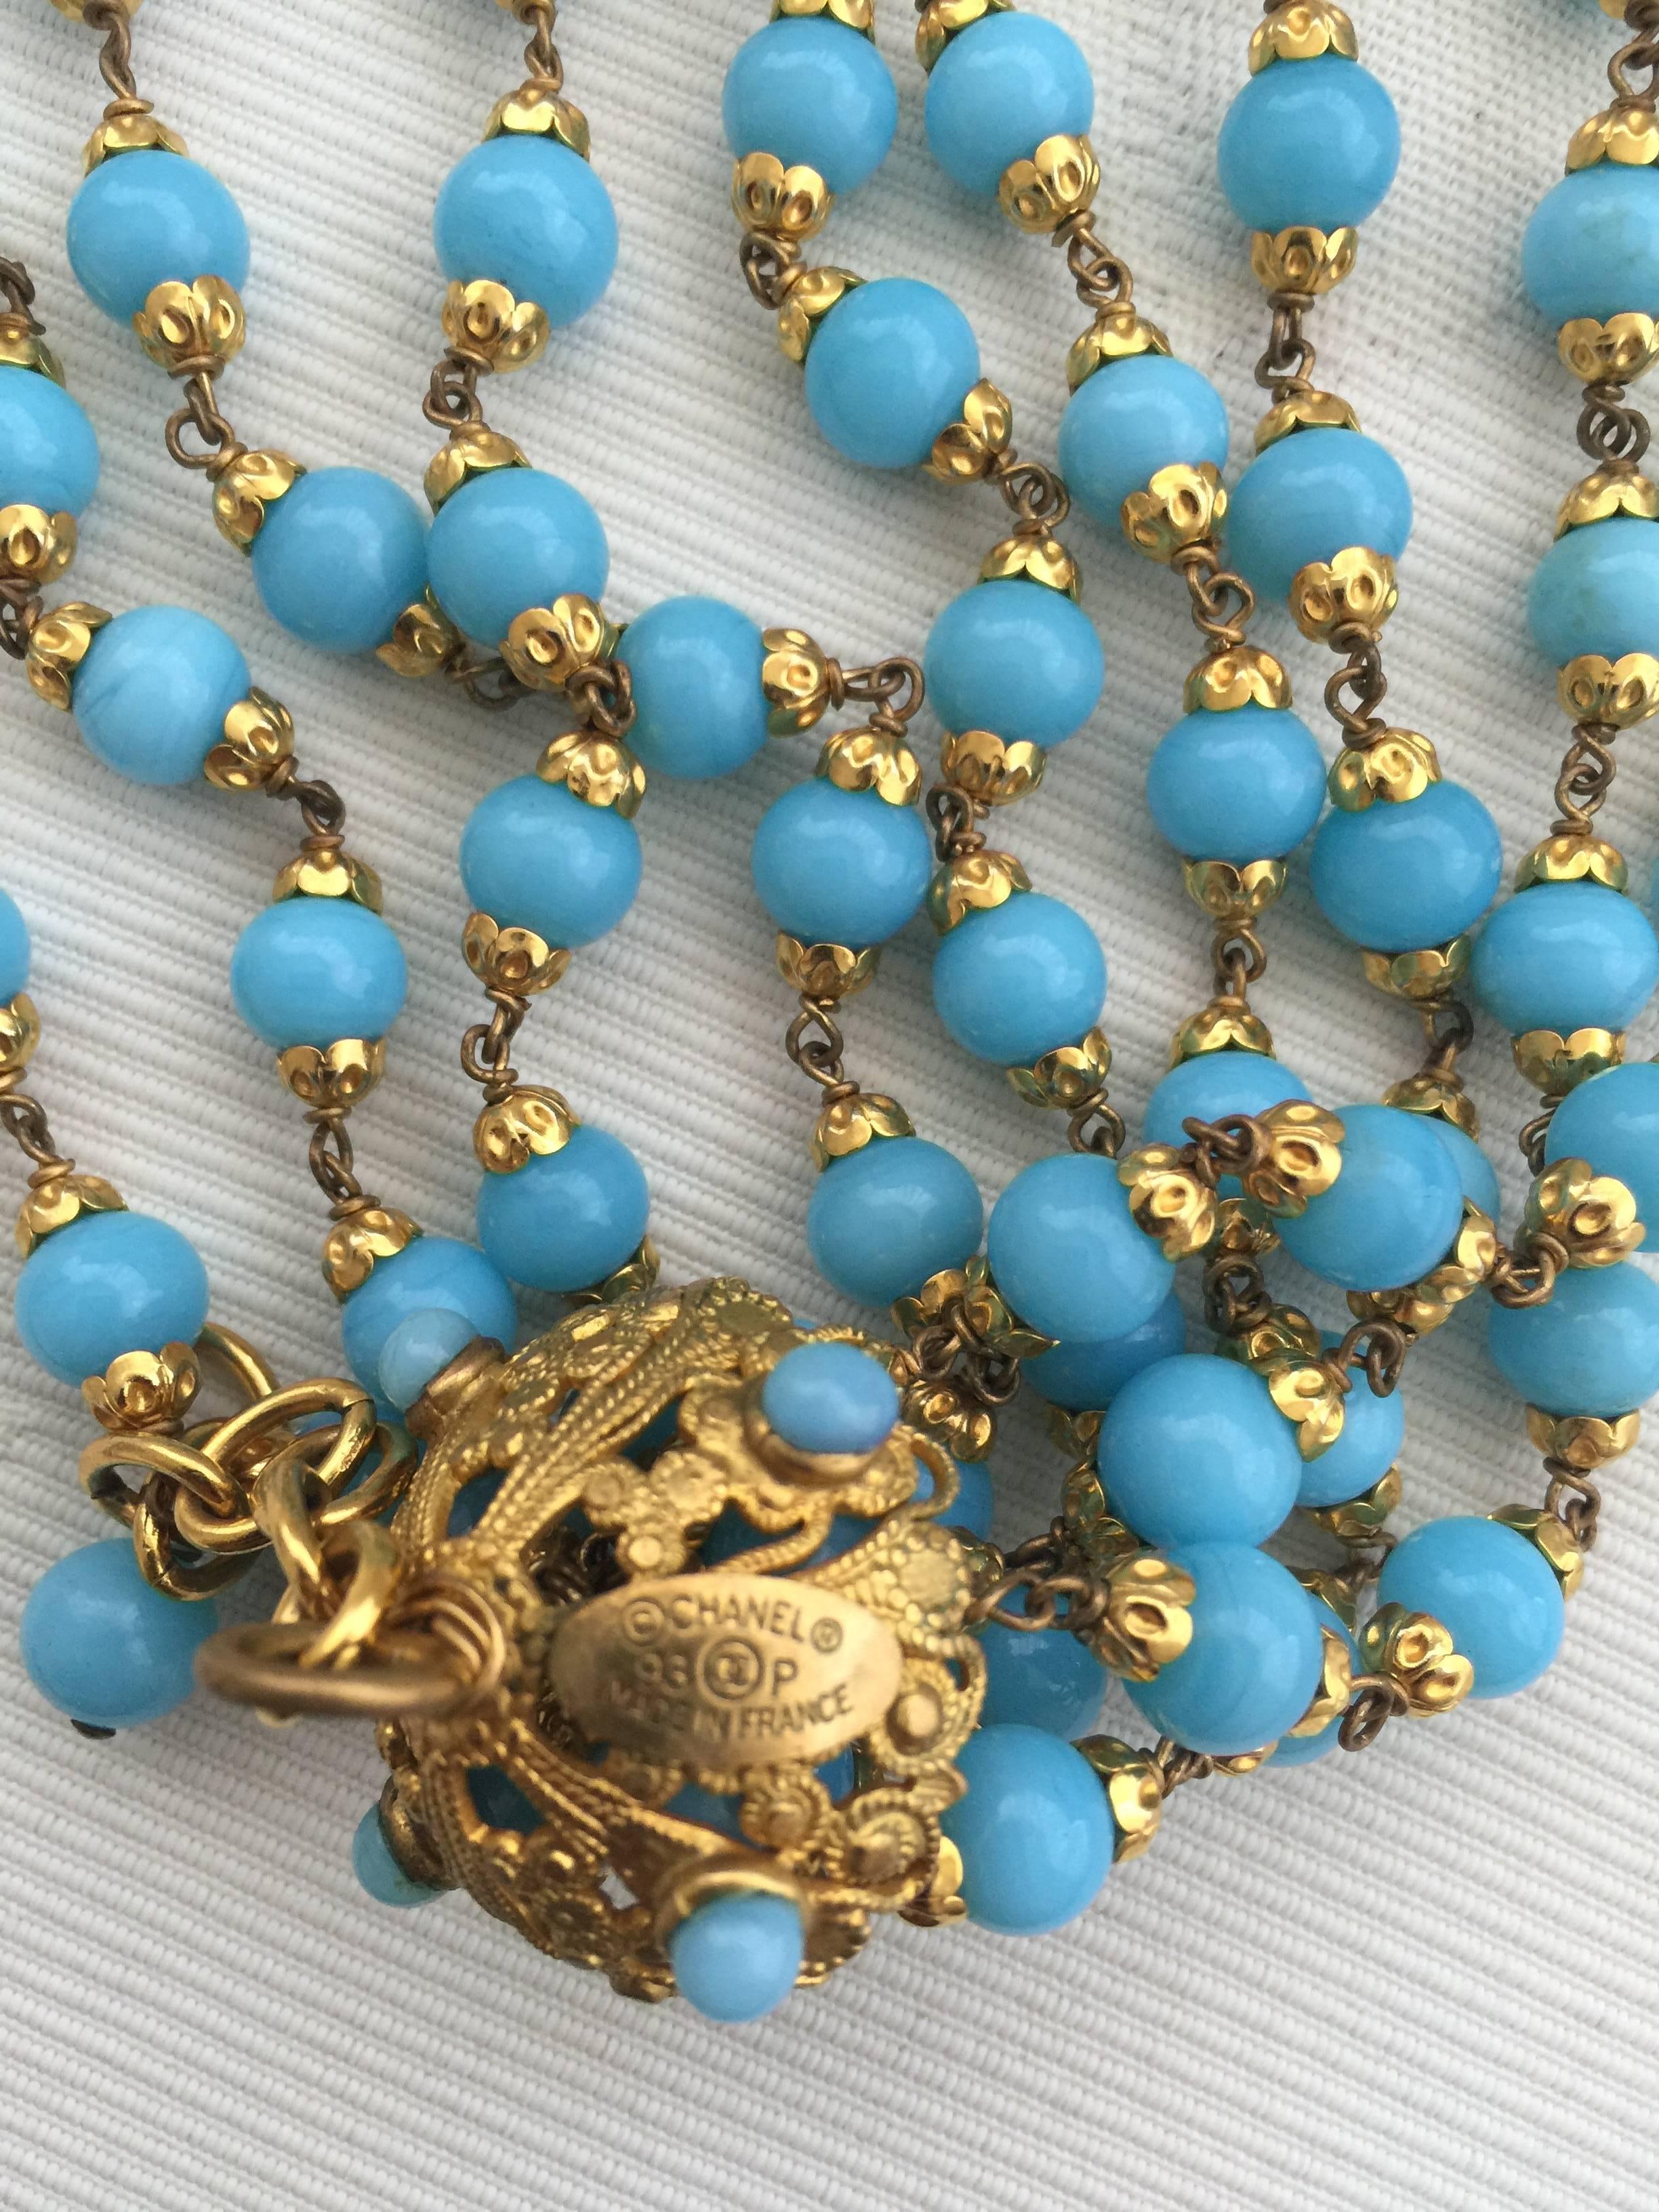 Women's Stunning Turquoise Multi Strand Chanel Necklace